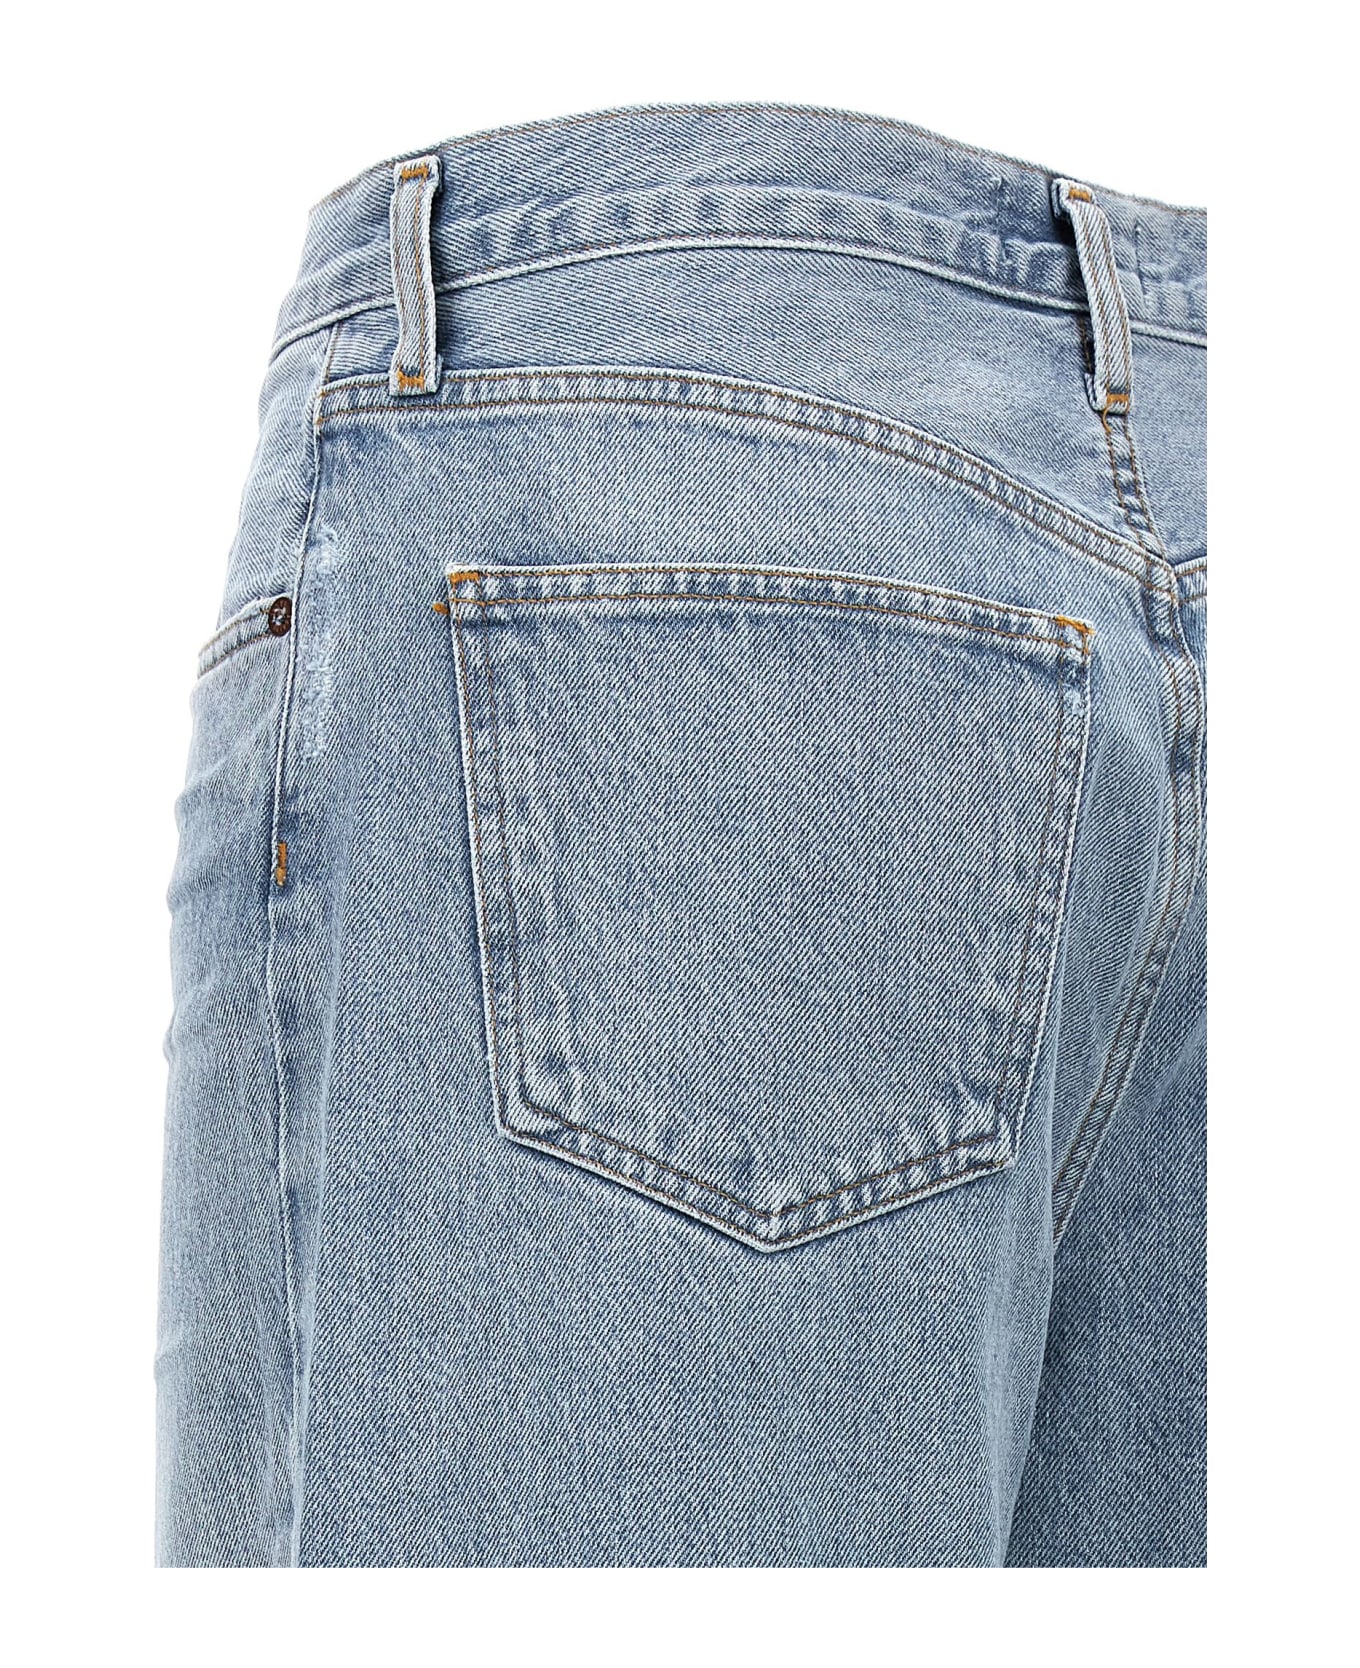 AGOLDE 'dame' Jeans - Clear Blue